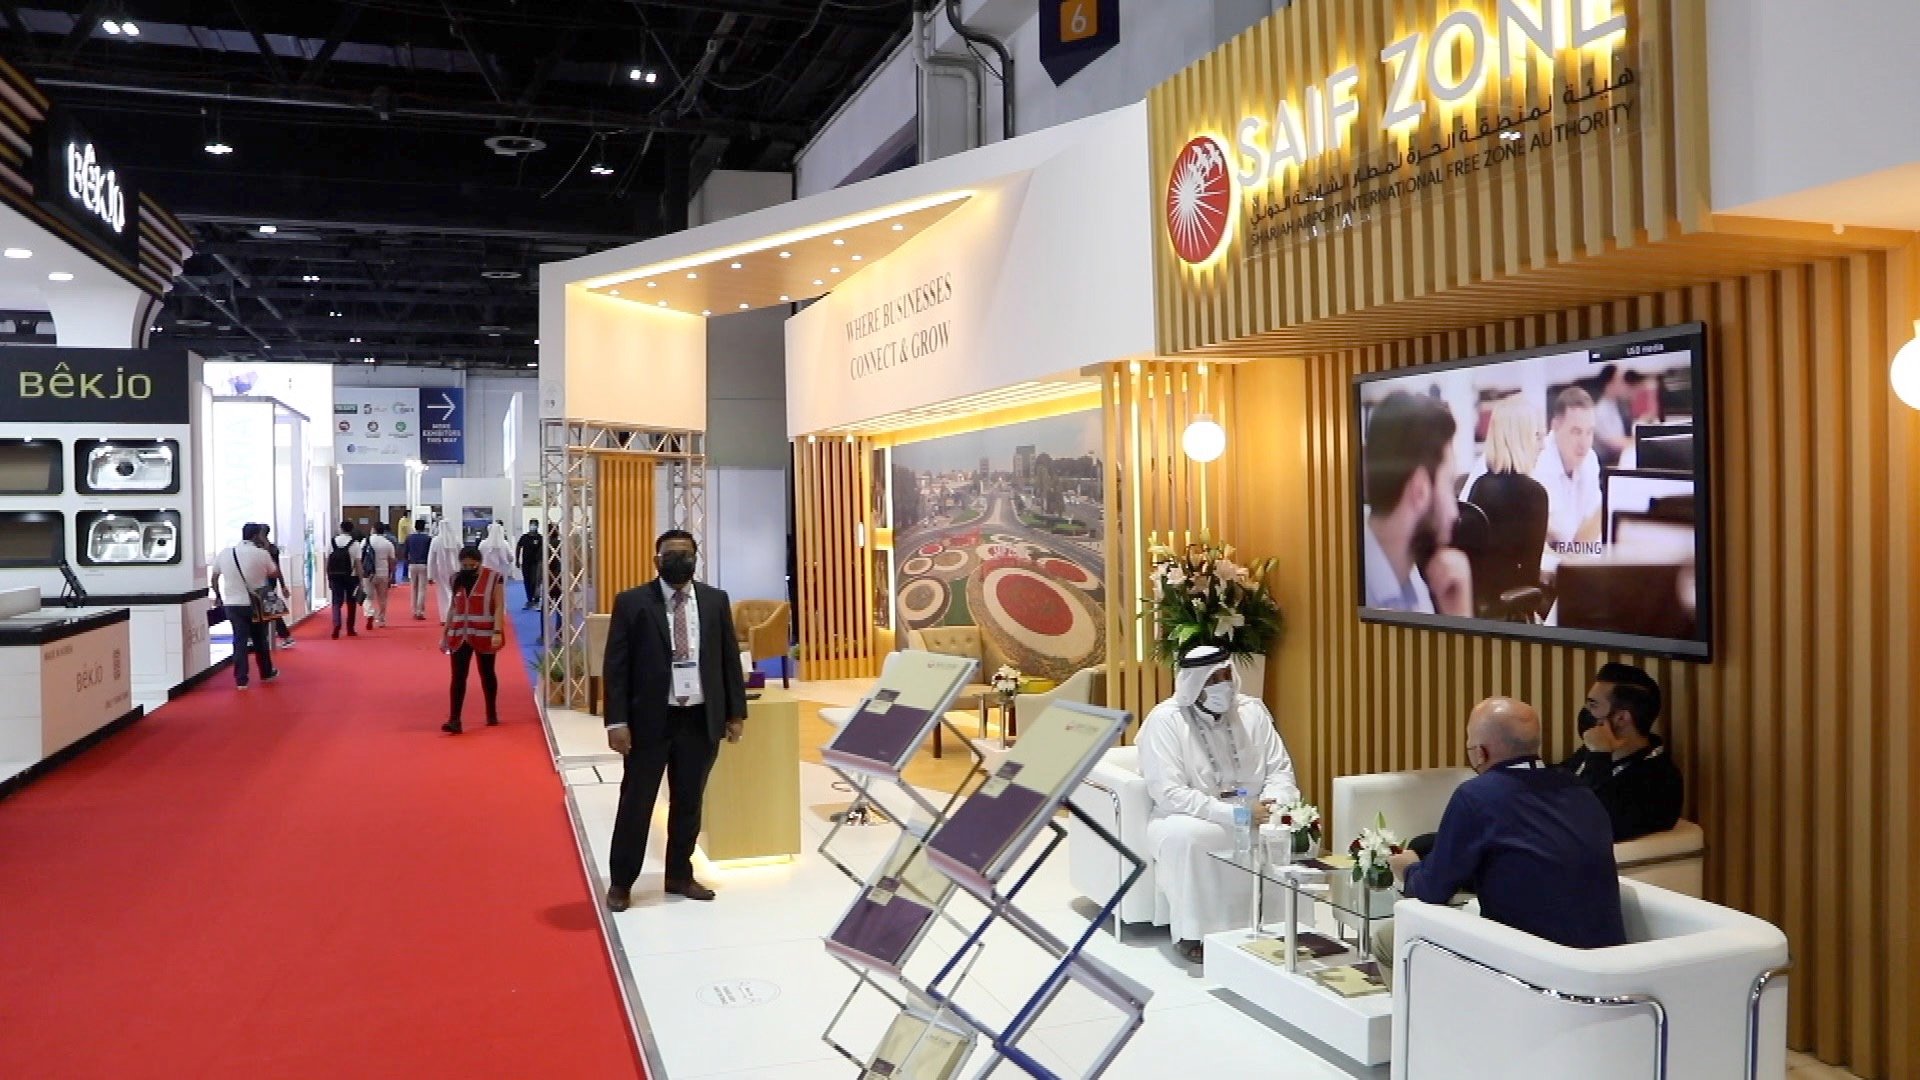 SAIF Zone concludes fruitful participation in the Big5 2021 Show